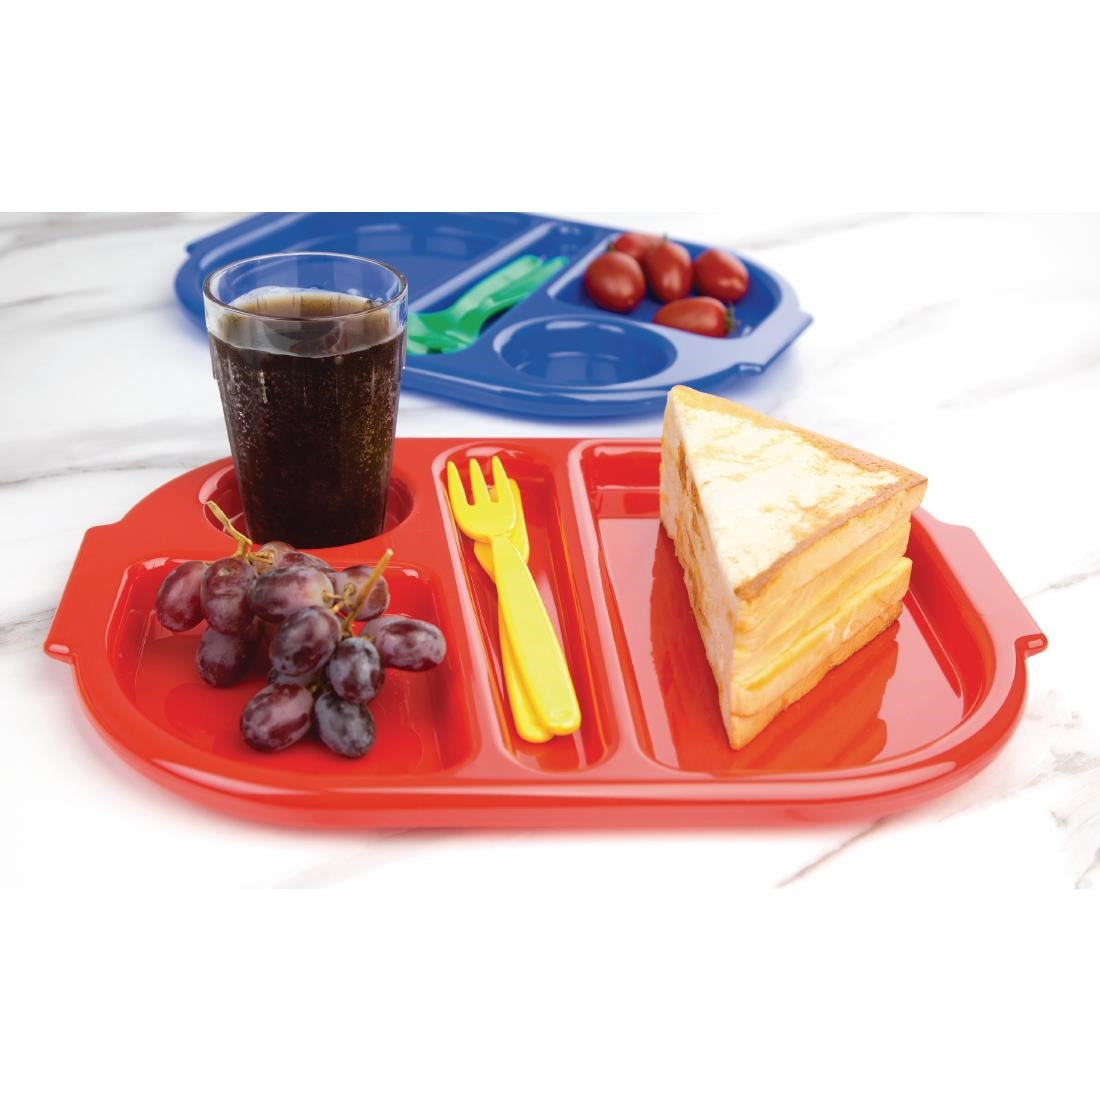 DL126 Kristallon Small Polycarbonate Compartment Food Trays Red 322mm JD Catering Equipment Solutions Ltd